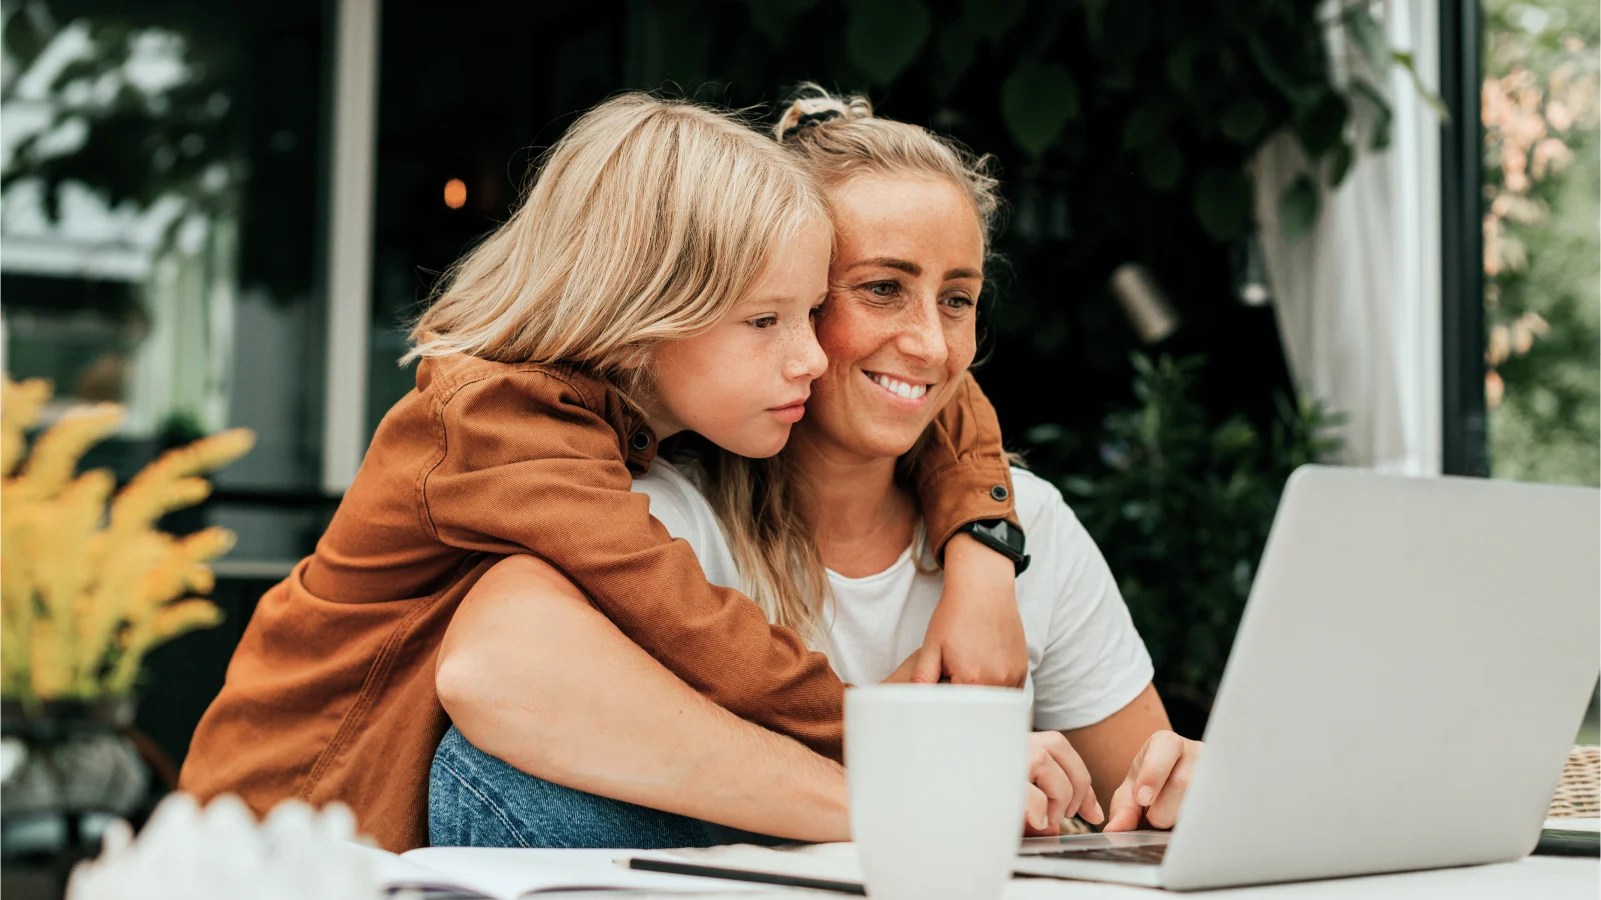 5 things to check before selecting your benefits - Smiling woman using laptop with son embracing her